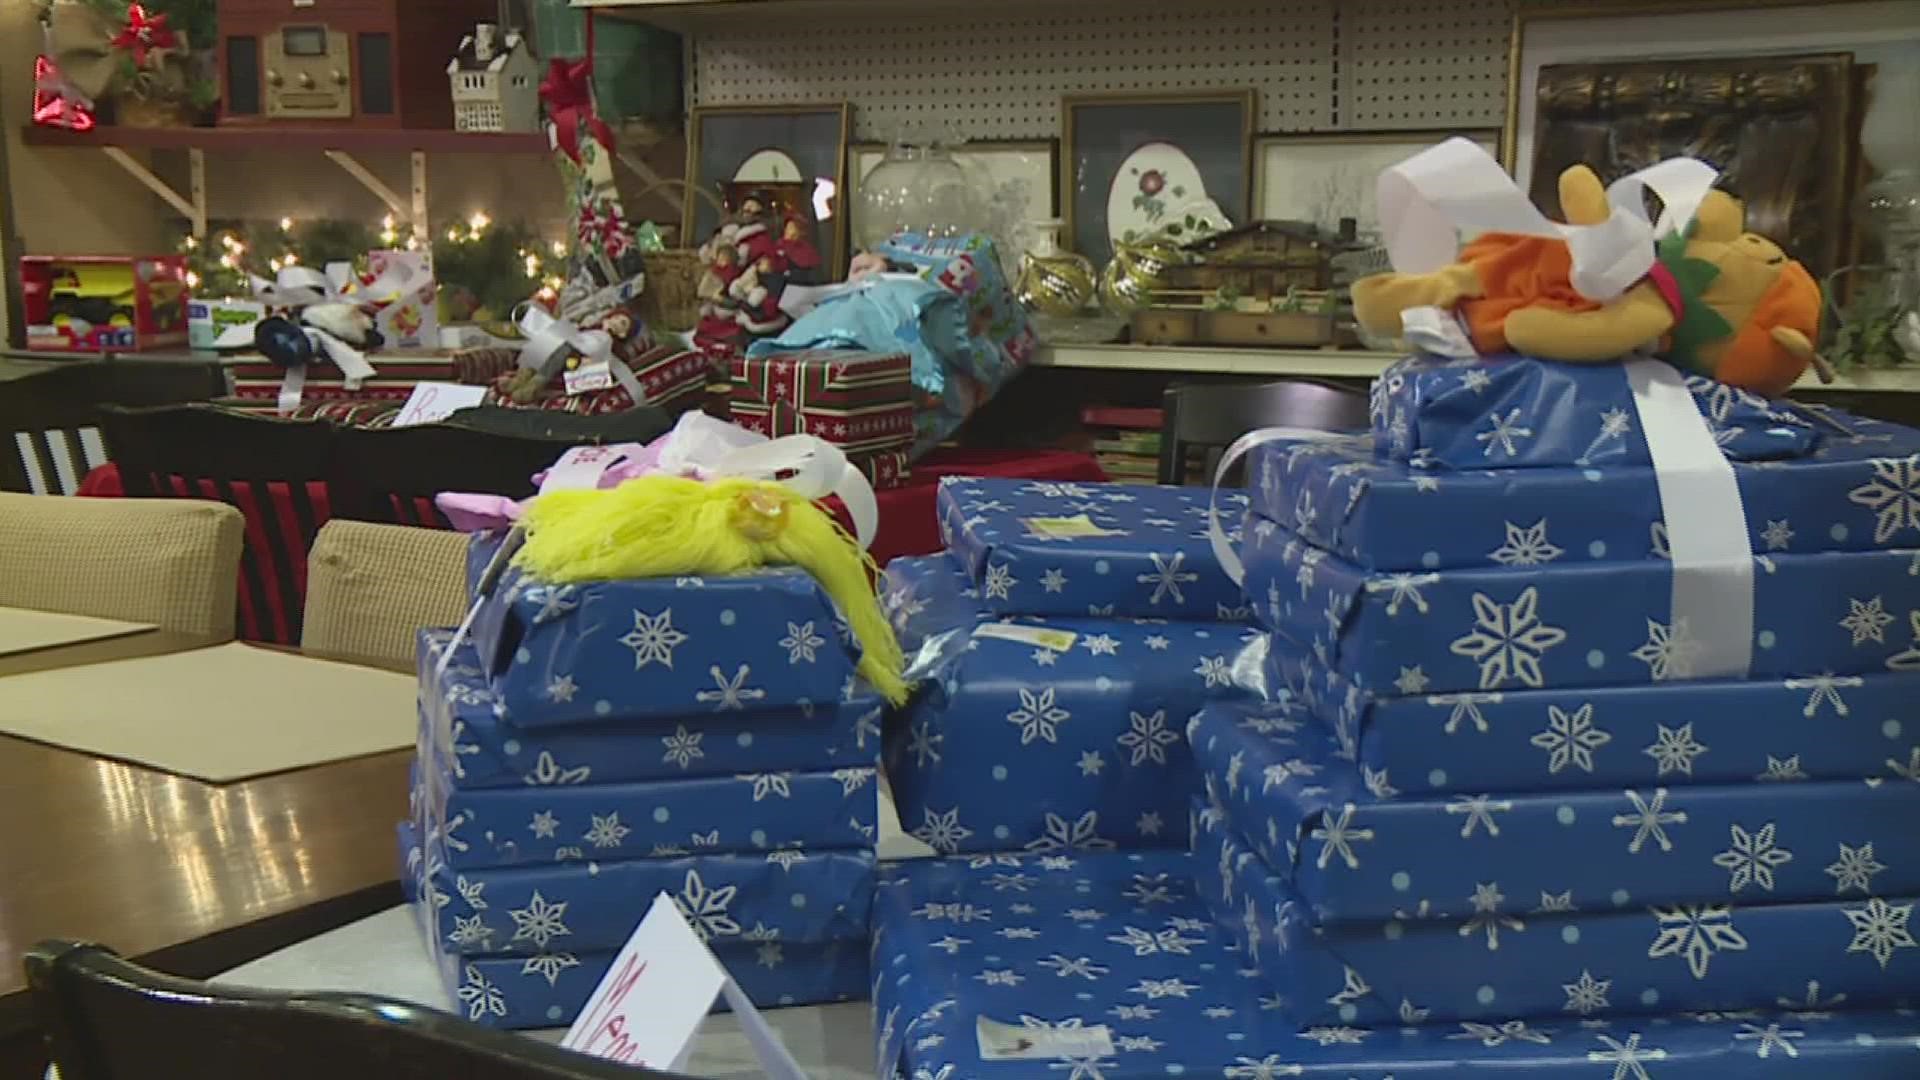 'Toys for Tampico' was started four years ago to support Tampico children in need of Christmas gifts.